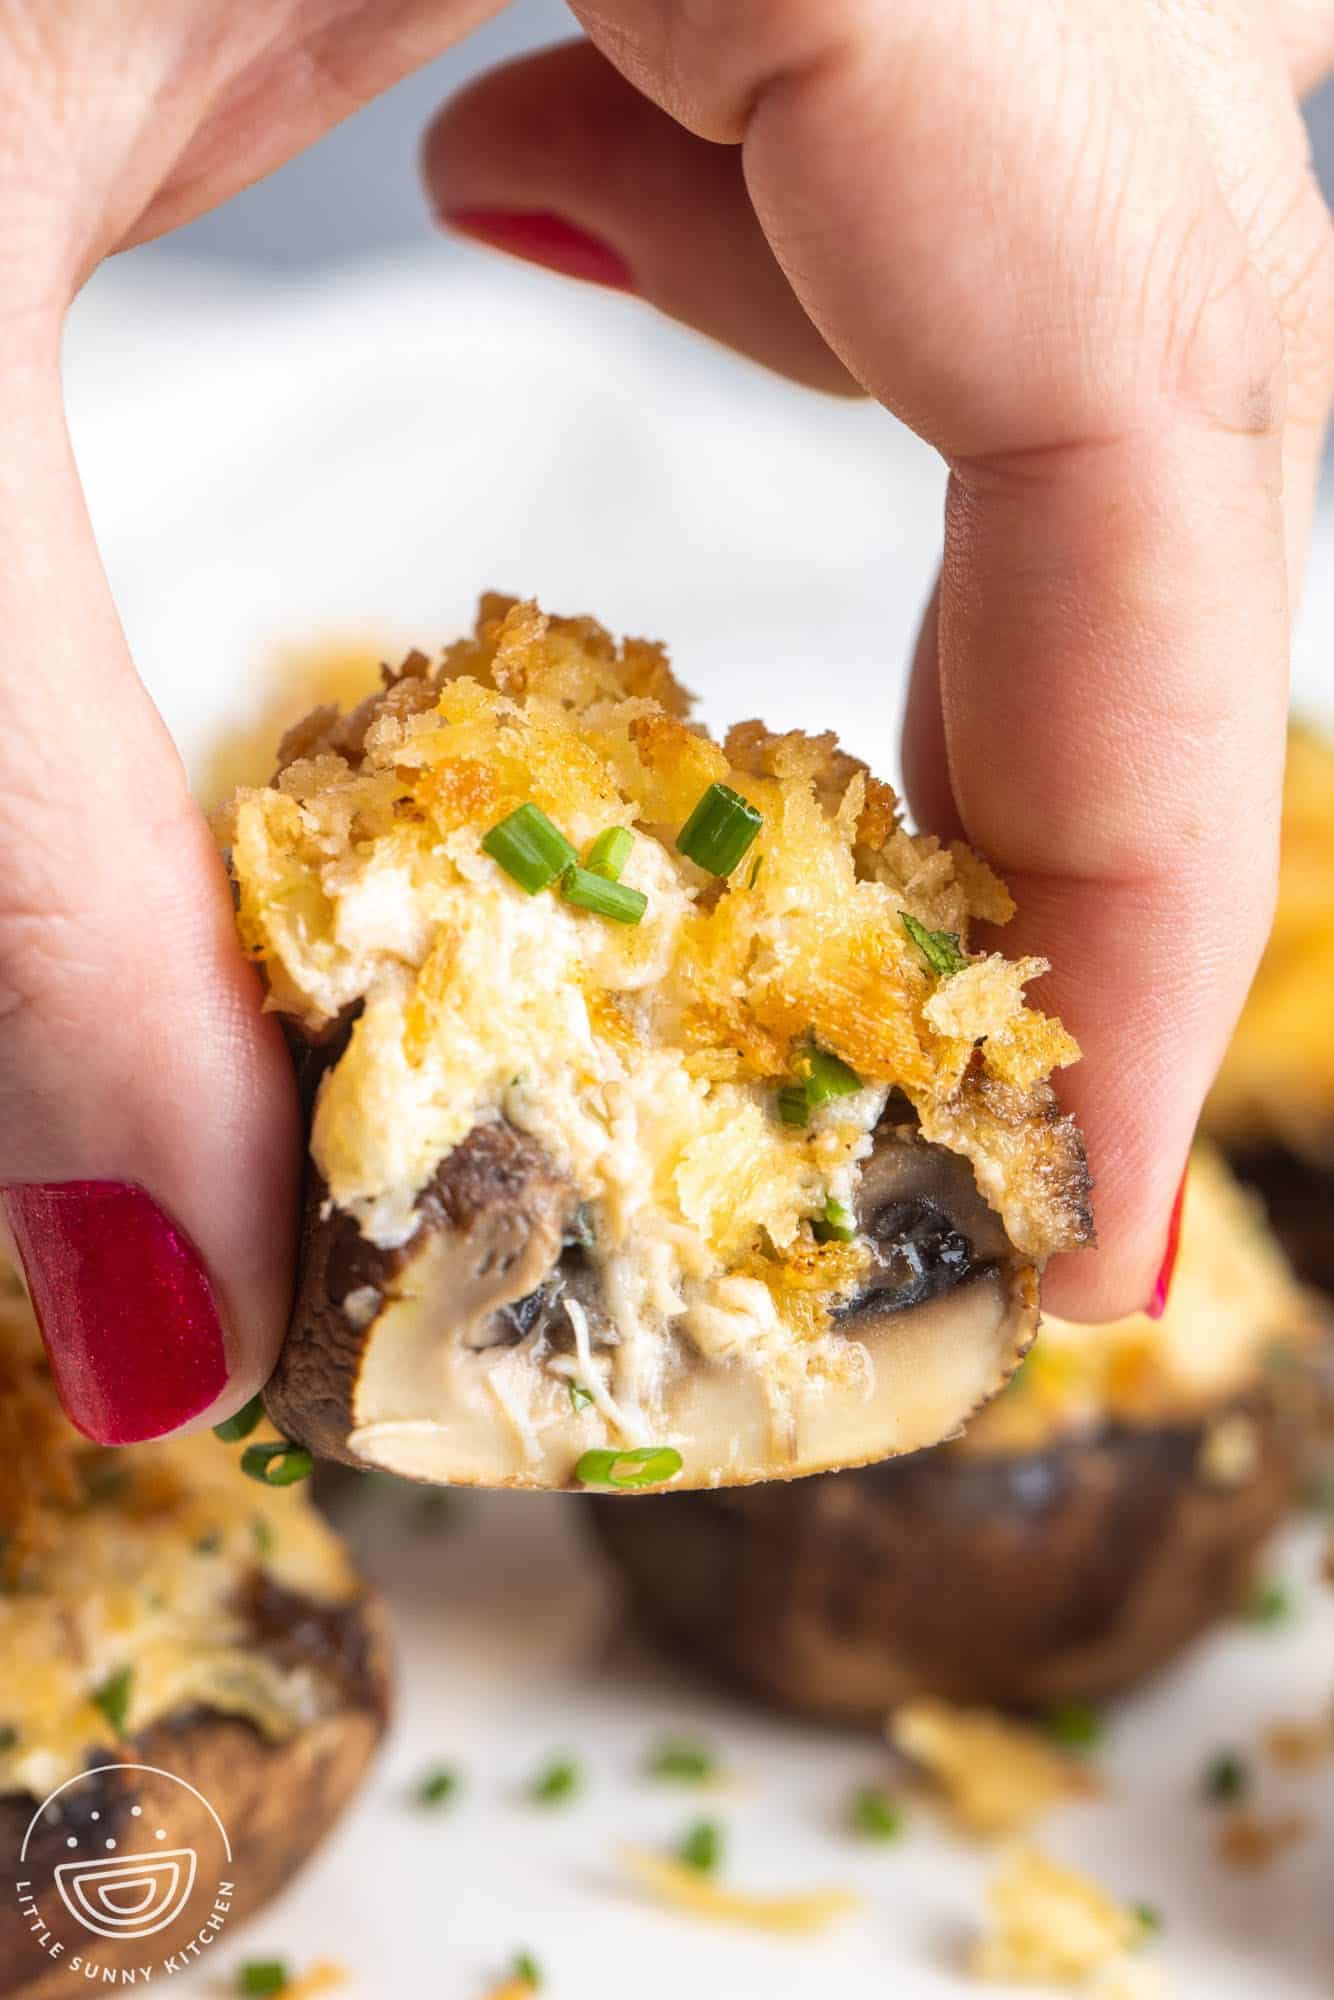 a hand holding half of a crab stuffed mushroom garnished with chive